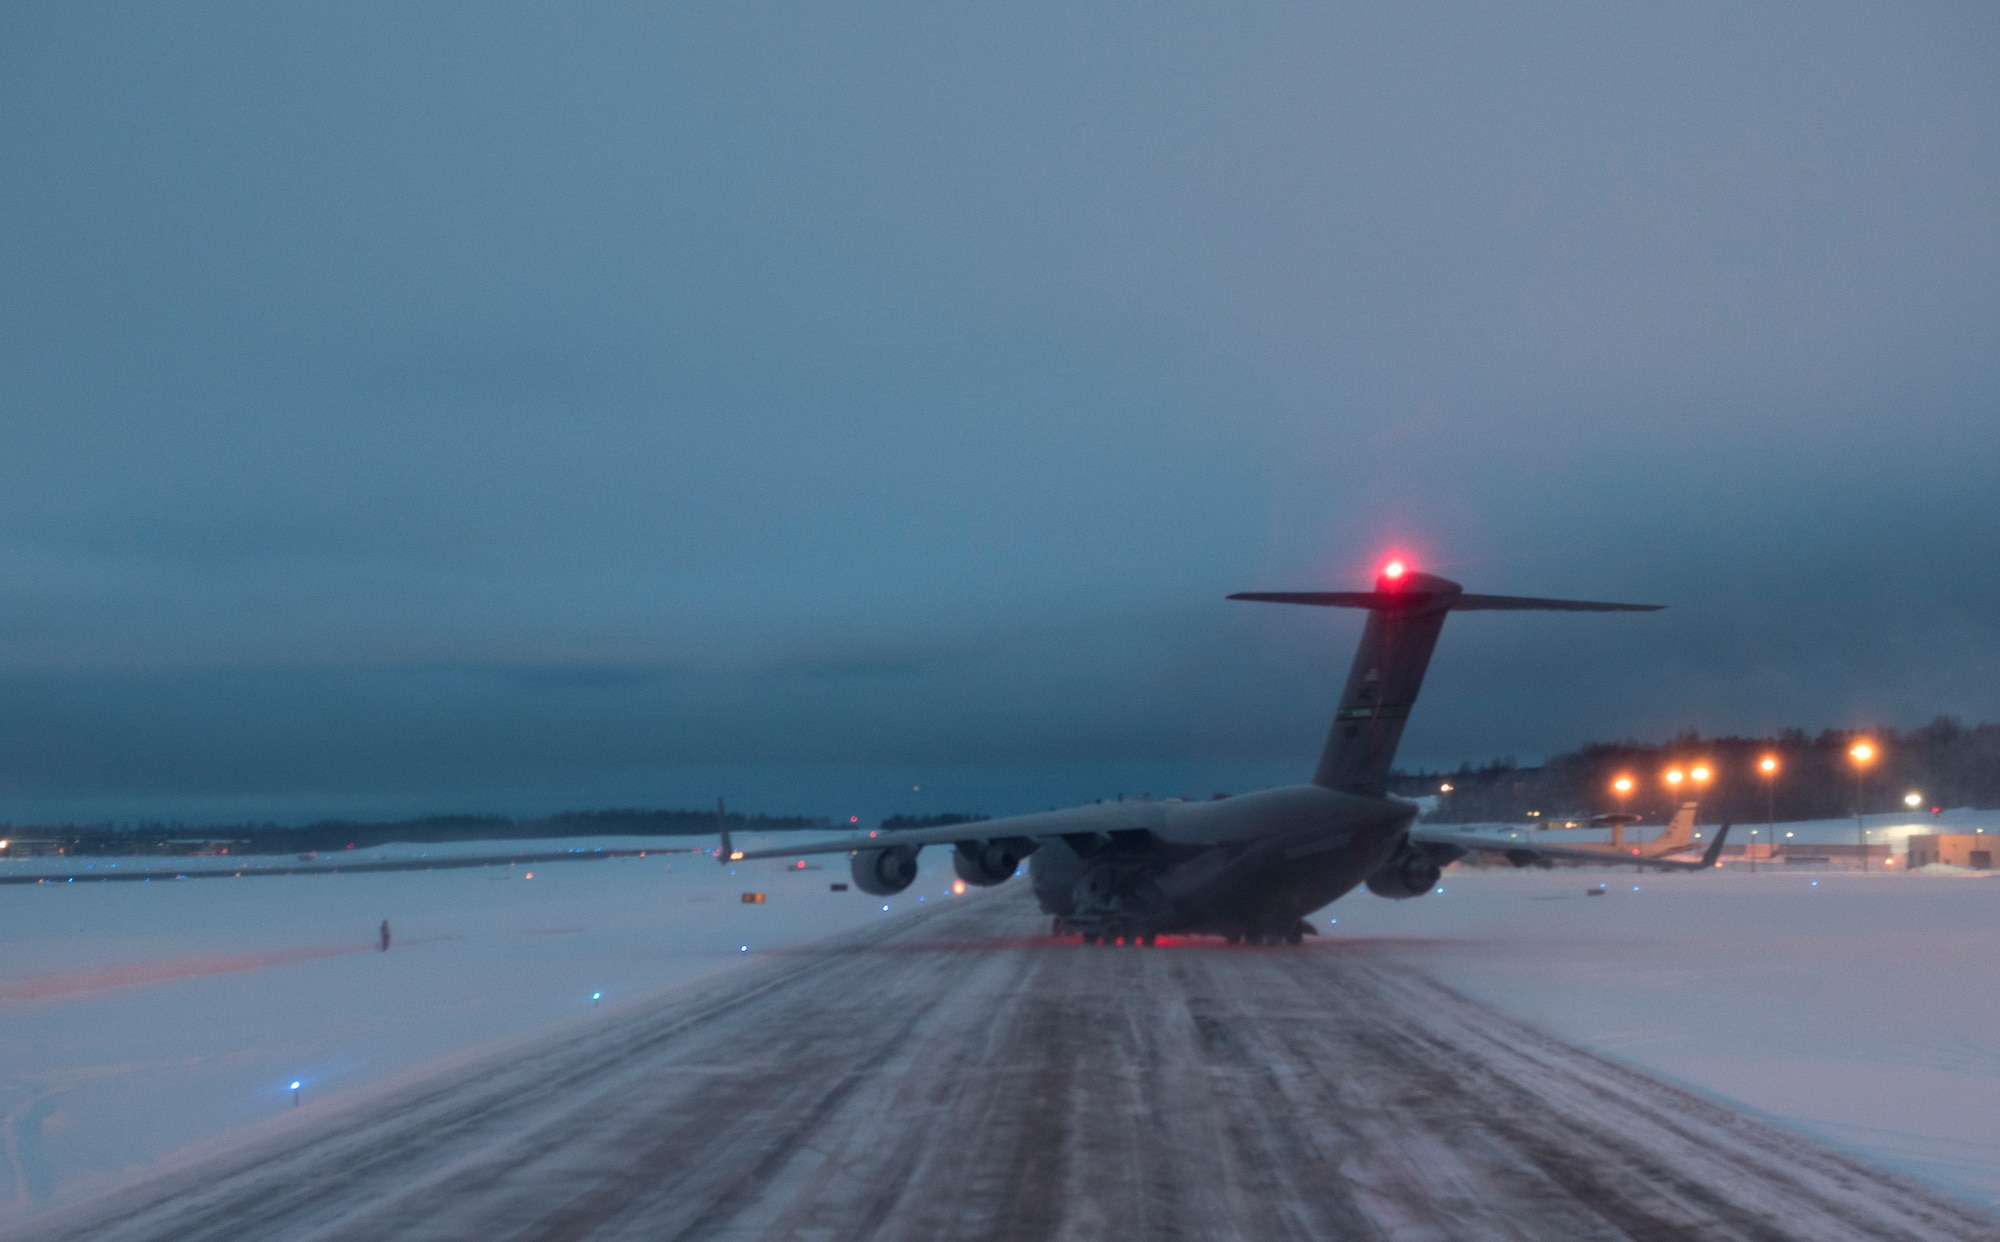 A C-17 Globemaster III taxis to a runway during Exercise Arctic Pegasus at Elmendorf Air Force Base, Alaska, March 13, 2018. The 62nd Airlift Wing sent two C-17s to deliver Army personnel and Strykers to Deadhorse, Alaska, during the exercise. (U.S. Air Force photo by Senior Airman Tryphena Mayhugh)